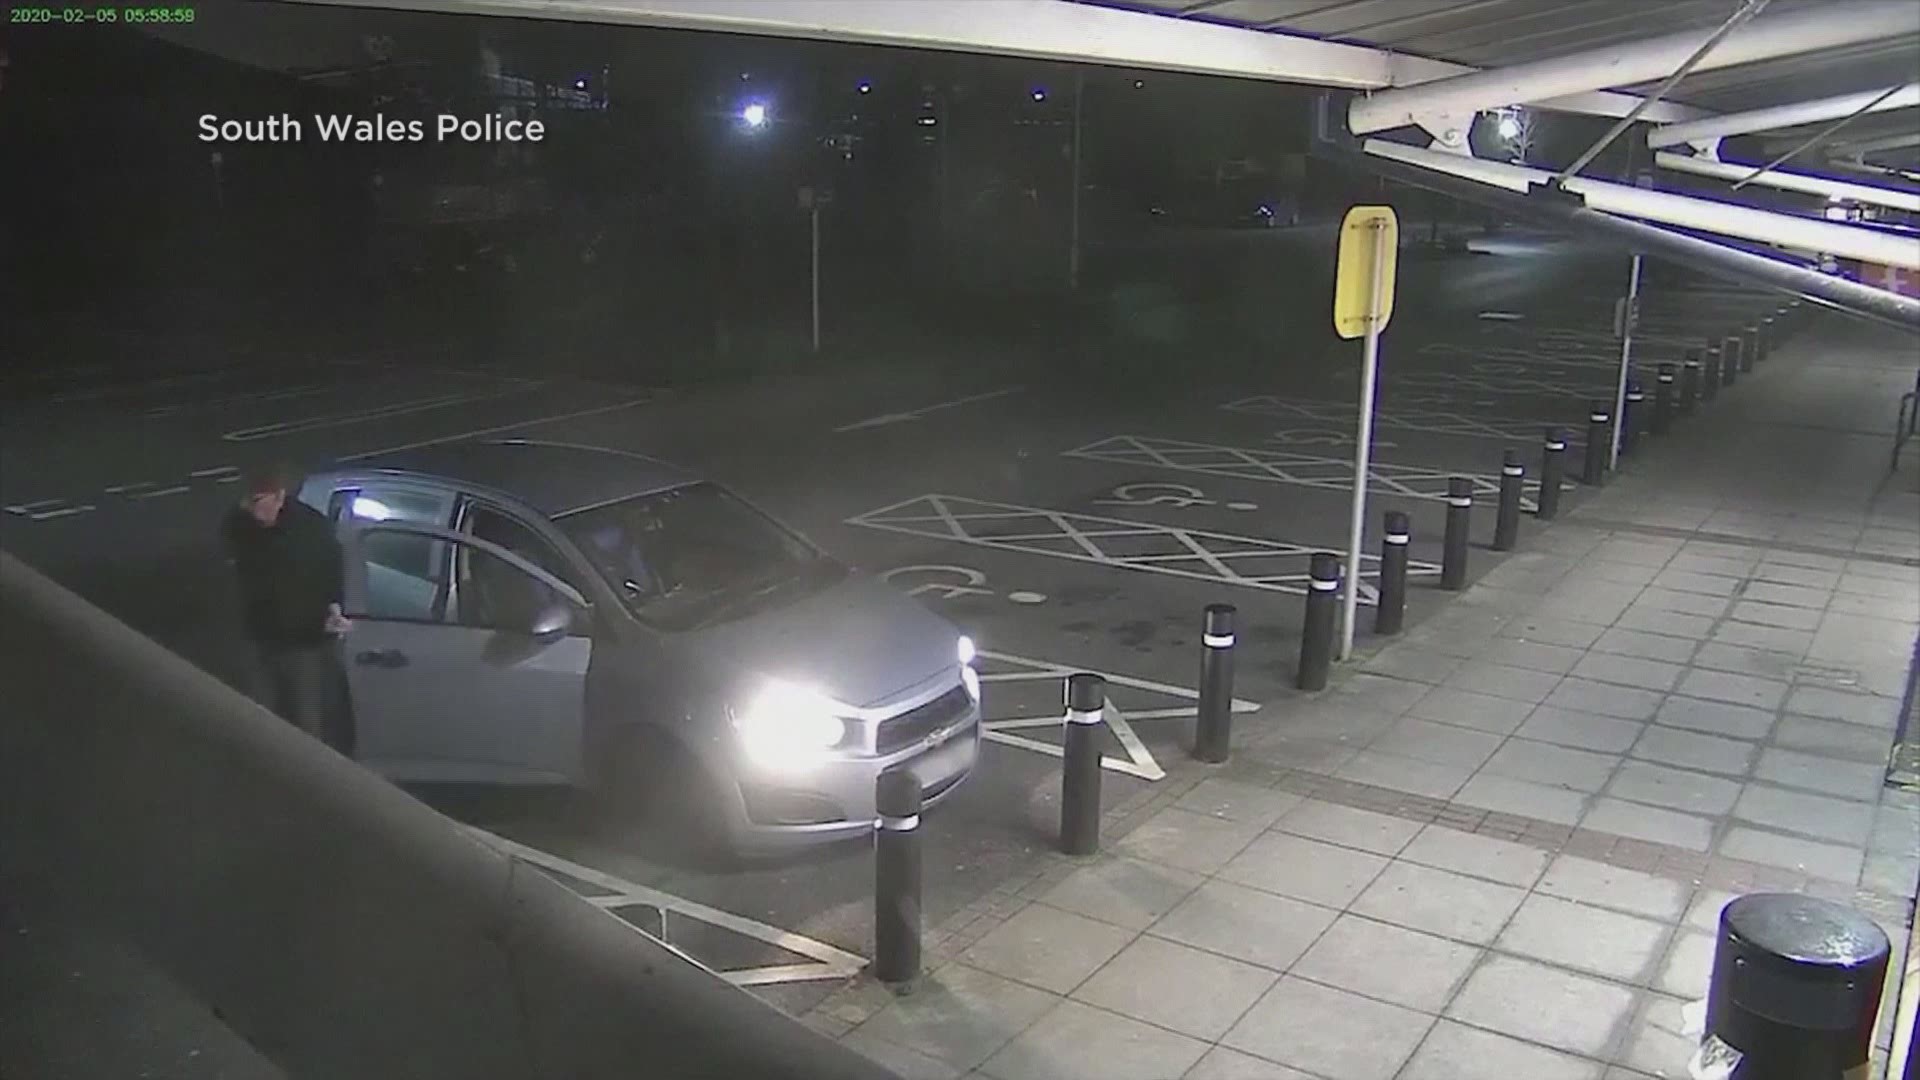 Police in South Wales released video of a 77-year-old man fighting off another man who was trying to rob him at an ATM.